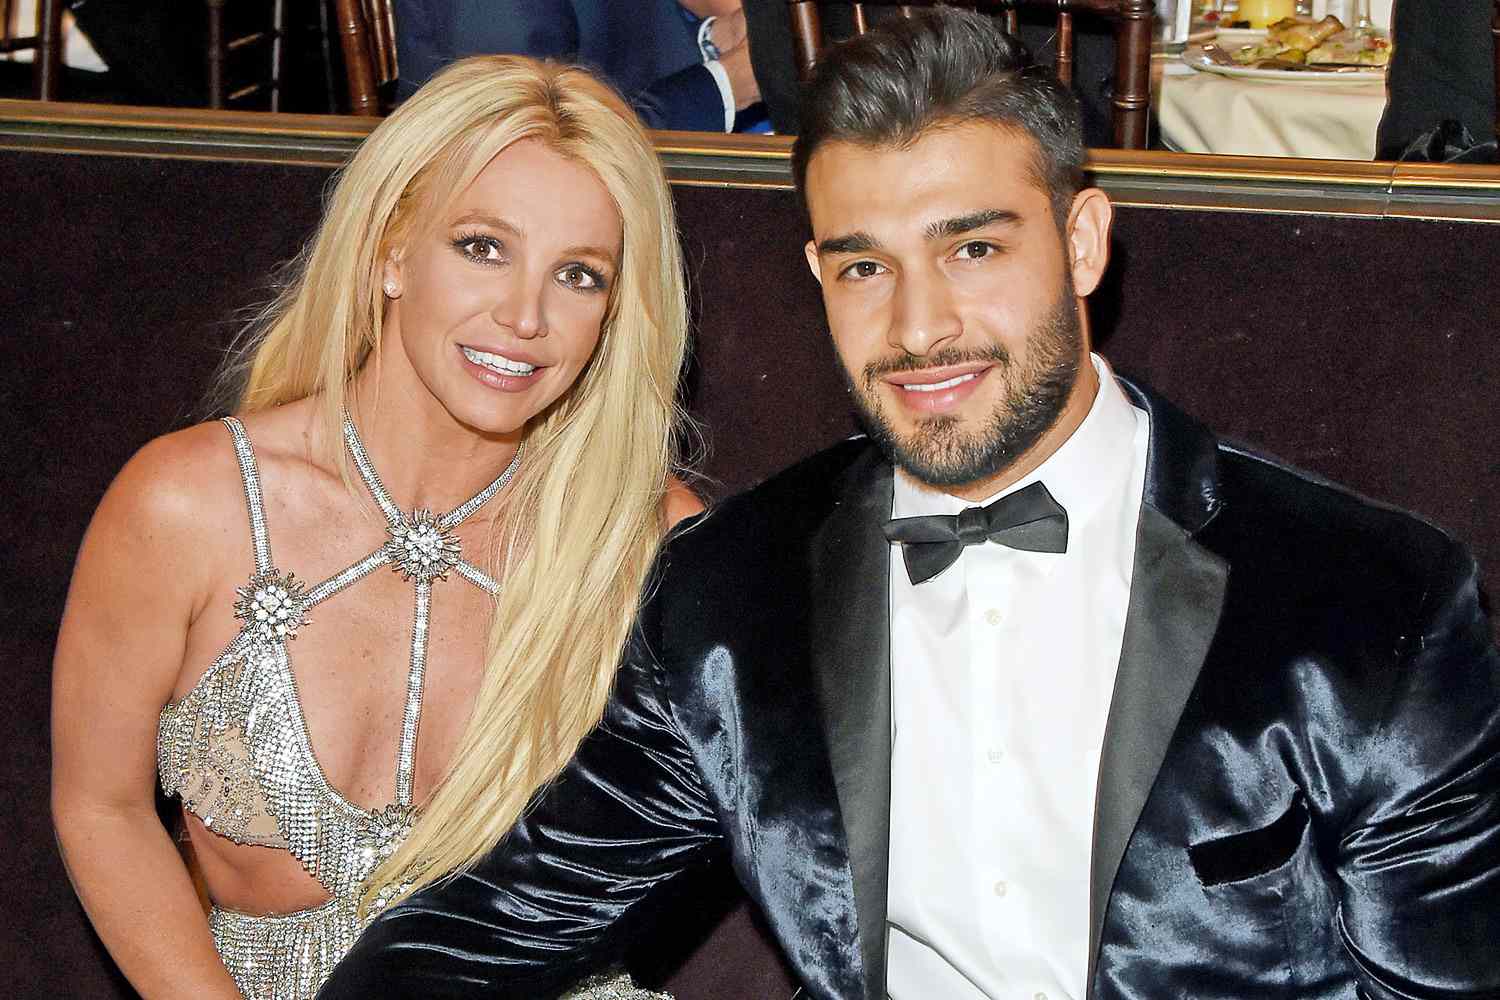 BEVERLY HILLS, CA - APRIL 12: Honoree Britney Spears (L) and Sam Asghari attend the 29th Annual GLAAD Media Awards at The Beverly Hilton Hotel on April 12, 2018 in Beverly Hills, California. (Photo by J. Merritt/Getty Images for GLAAD)